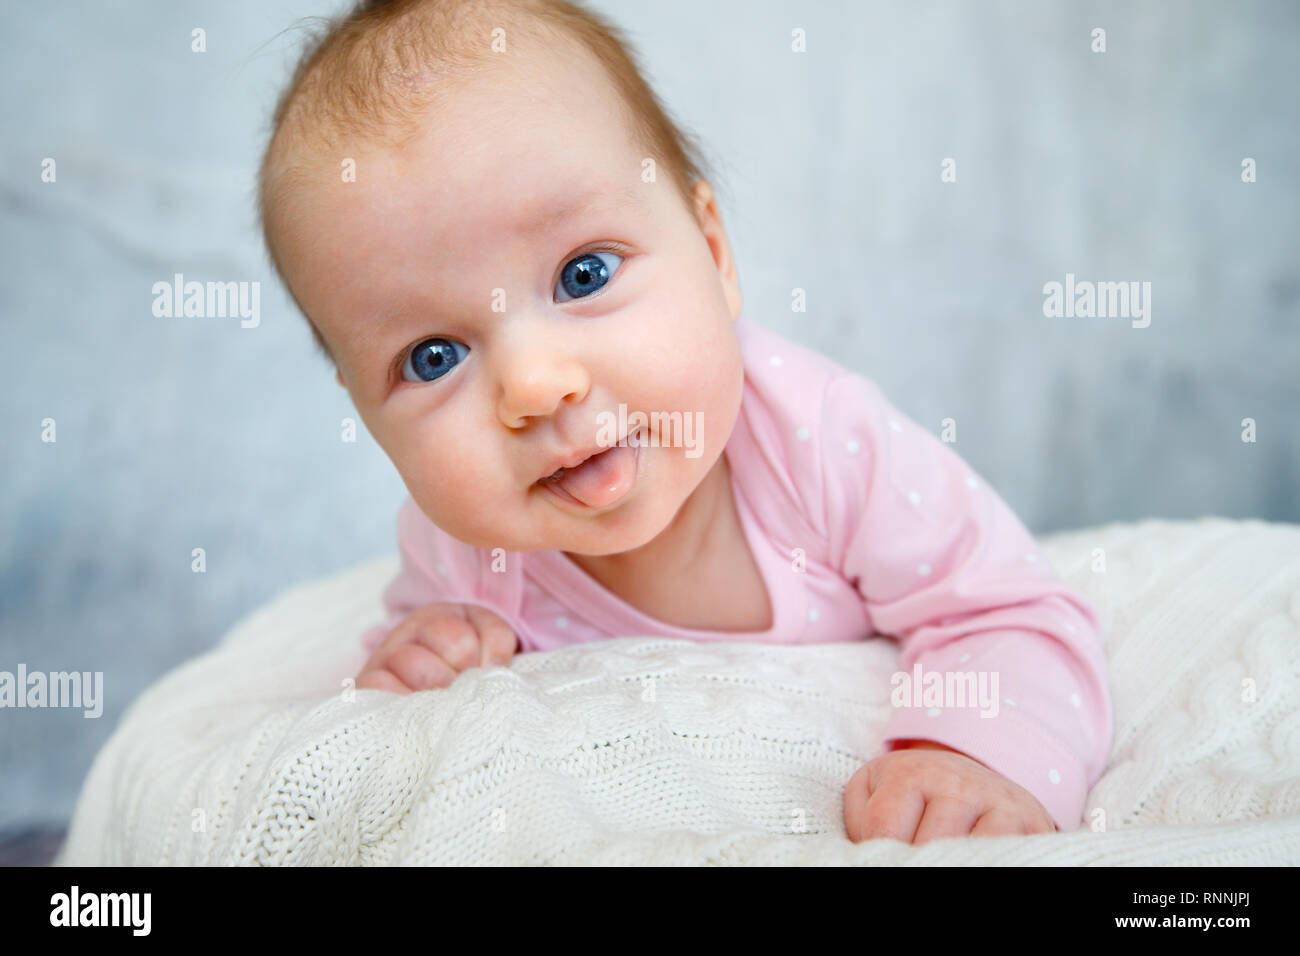 Portrait of a cute newborn baby lying on her stomach Stock Photo